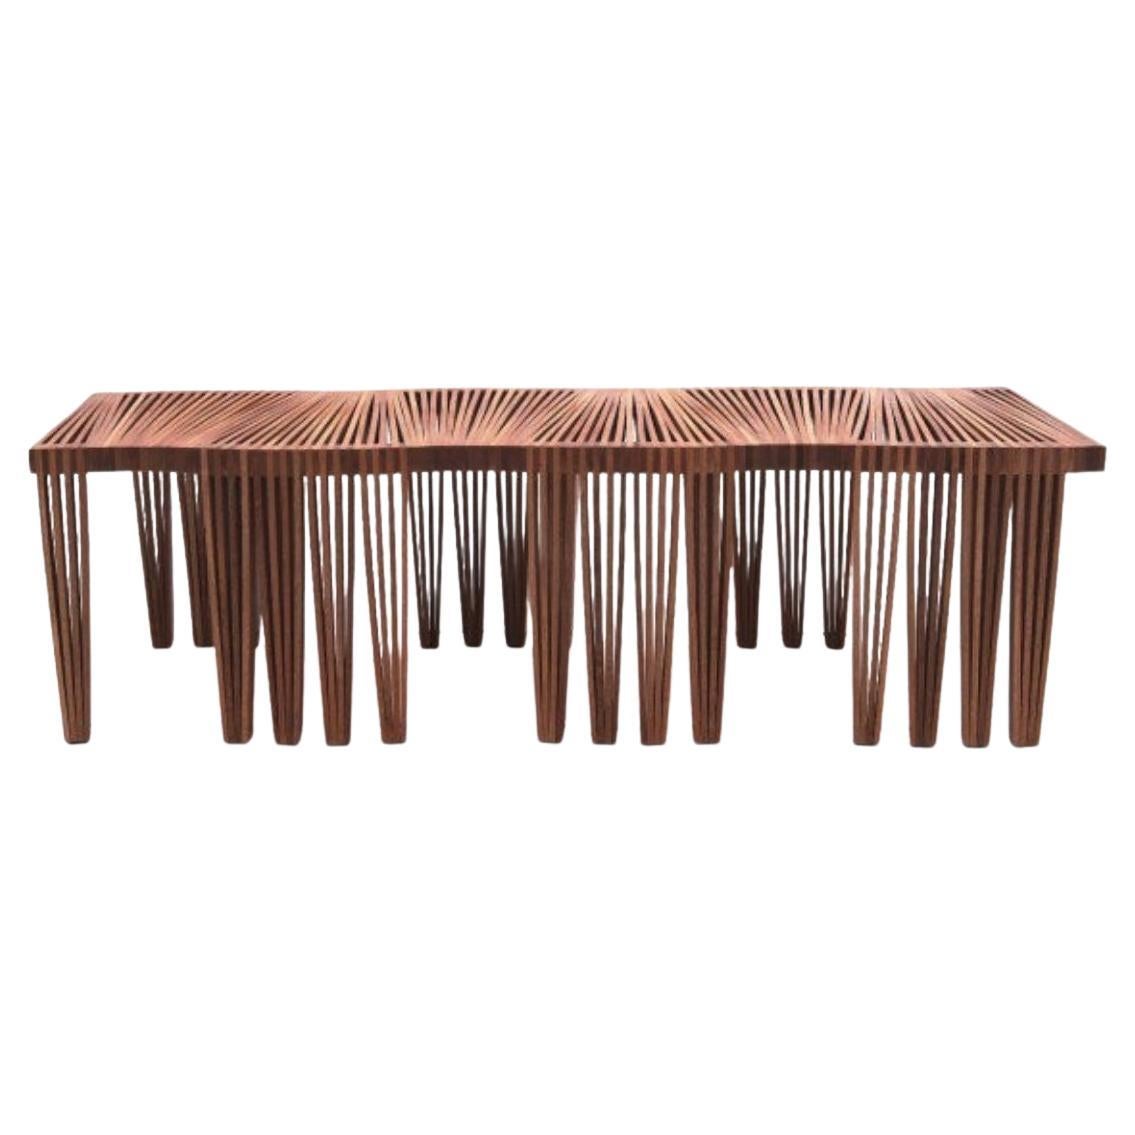 Optique Bench by Albert Potgieter Designs For Sale